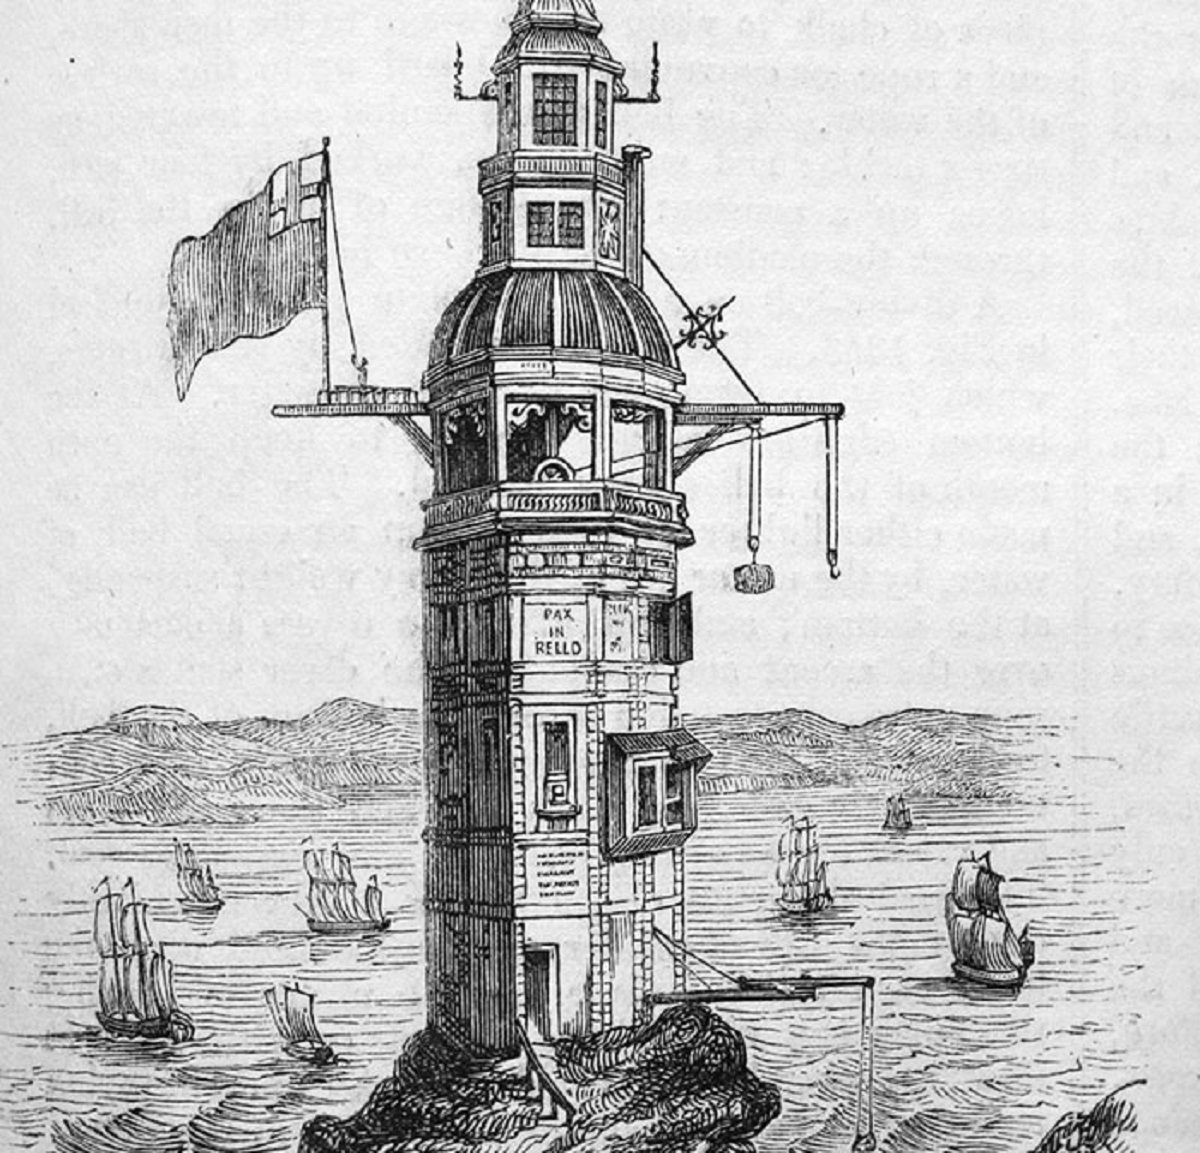 A man died in the lighthouse he built. Henry Winstanley was so confident in the lighthouse's design that he wished to be inside during "the greatest storm there ever was". The lighthouse was completely destroyed in the Great Storm of 1703, killing Winstanley.